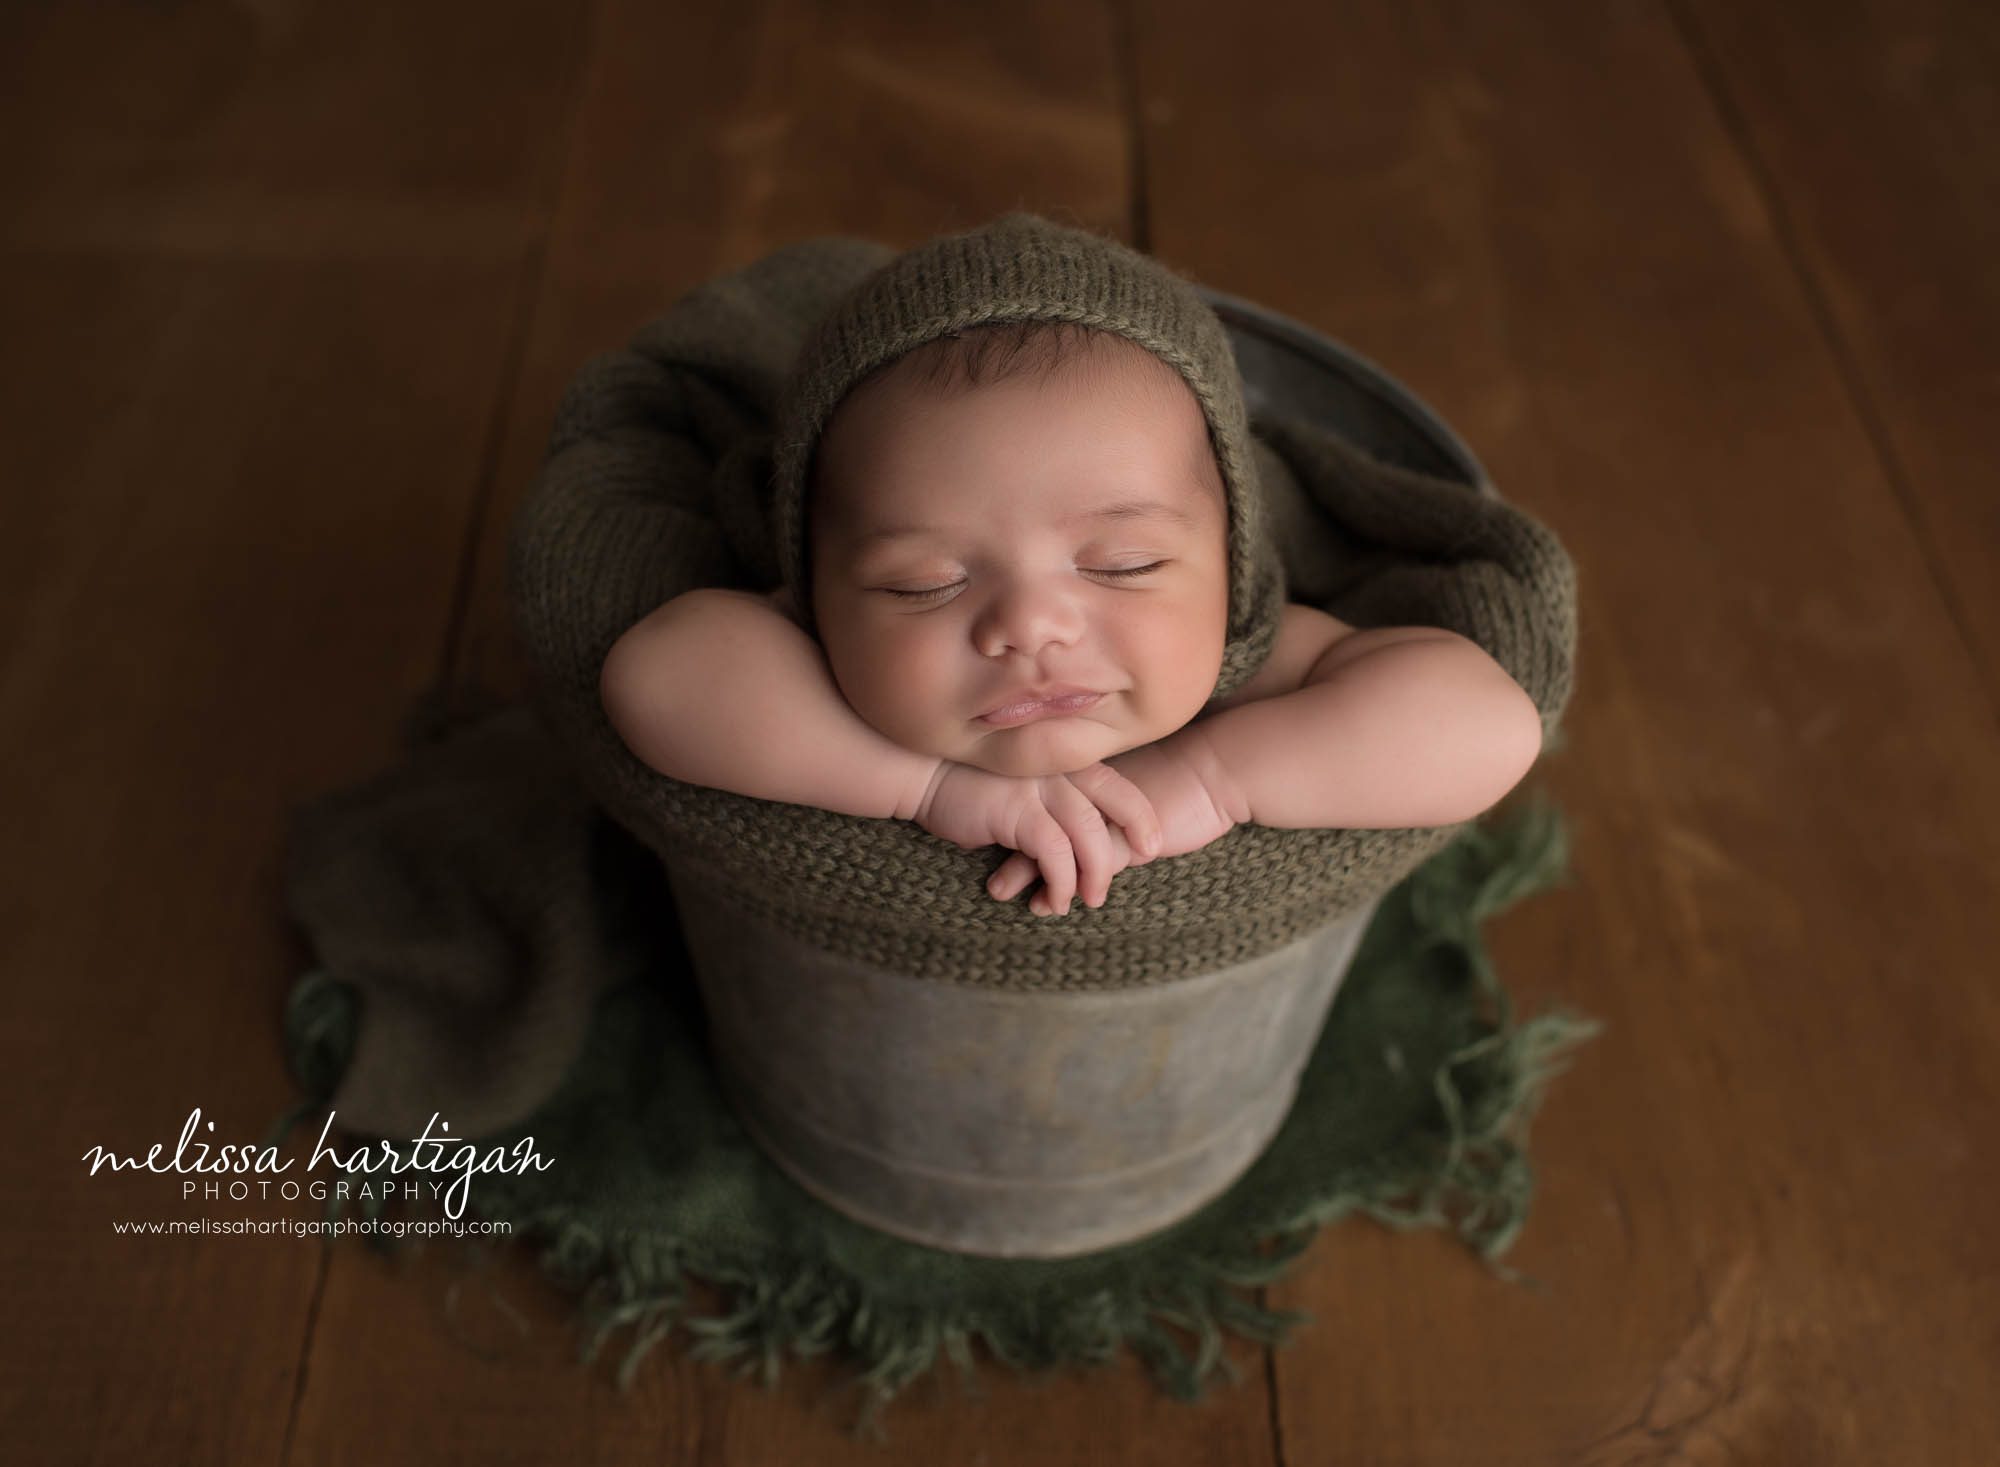 newborn baby boy posed in bucket with chin resting on hands smiling baby ct newborn photographer